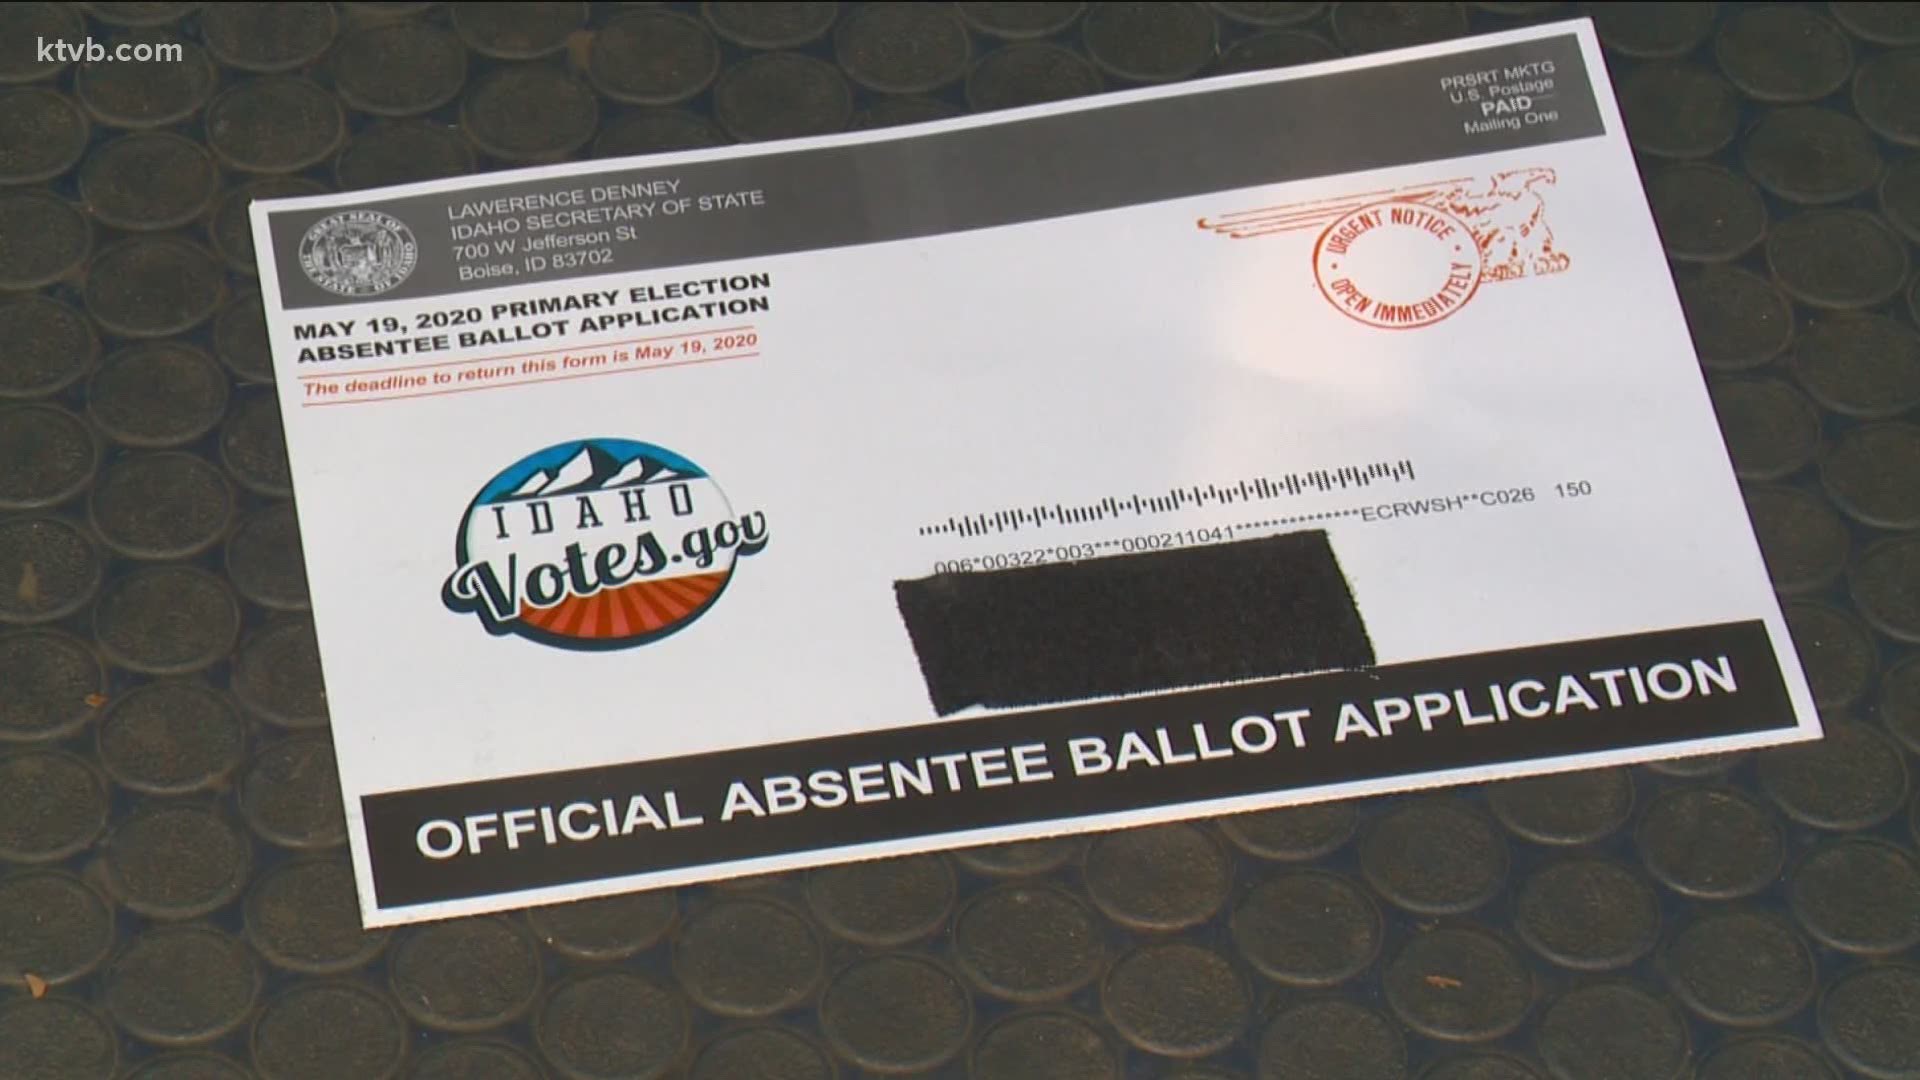 If you requested an absentee ballot for the November election, expect it to be in your mailbox in the coming days.